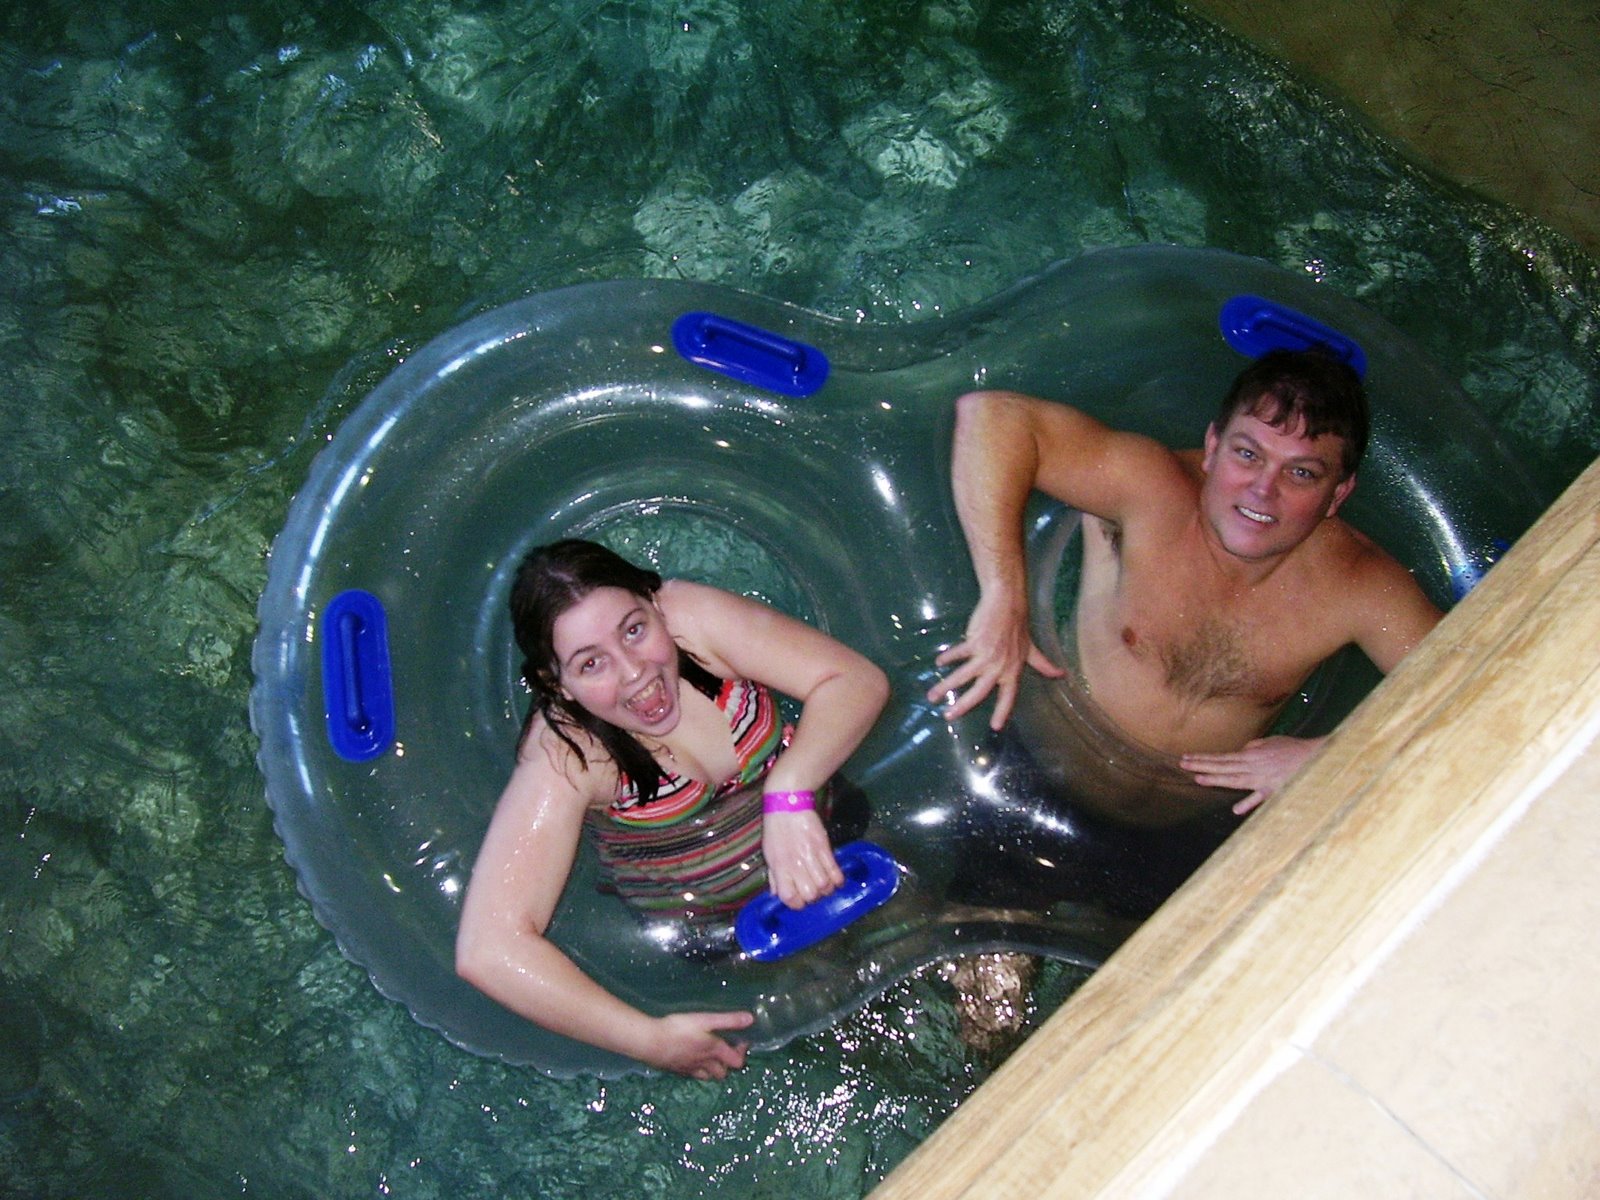 [Steve+and+Brianna+in+lazy+river+2.jpg]